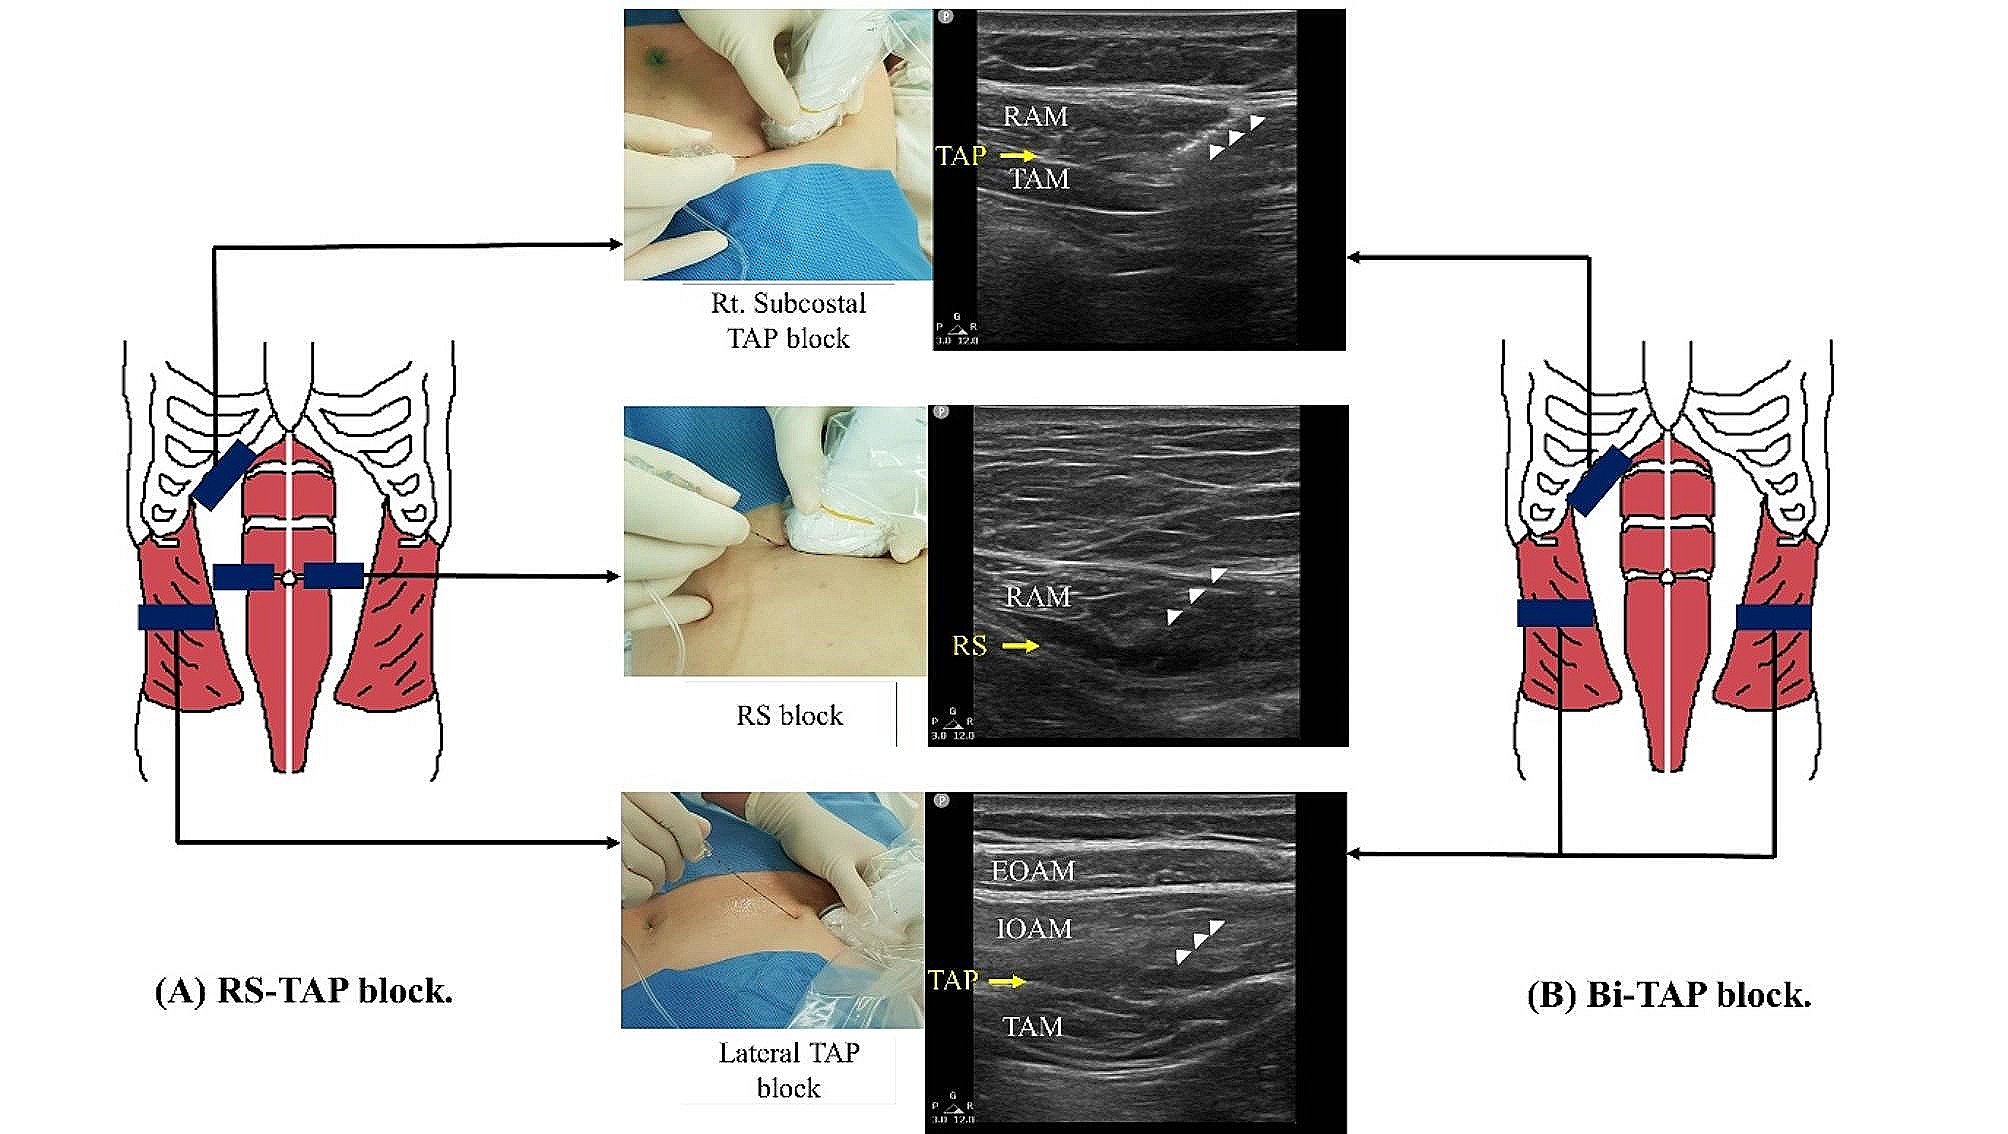 Analgesic effect of ultrasound-guided transversus abdominis plane block with or without rectus sheath block in laparoscopic cholecystectomy: a randomized, controlled trial